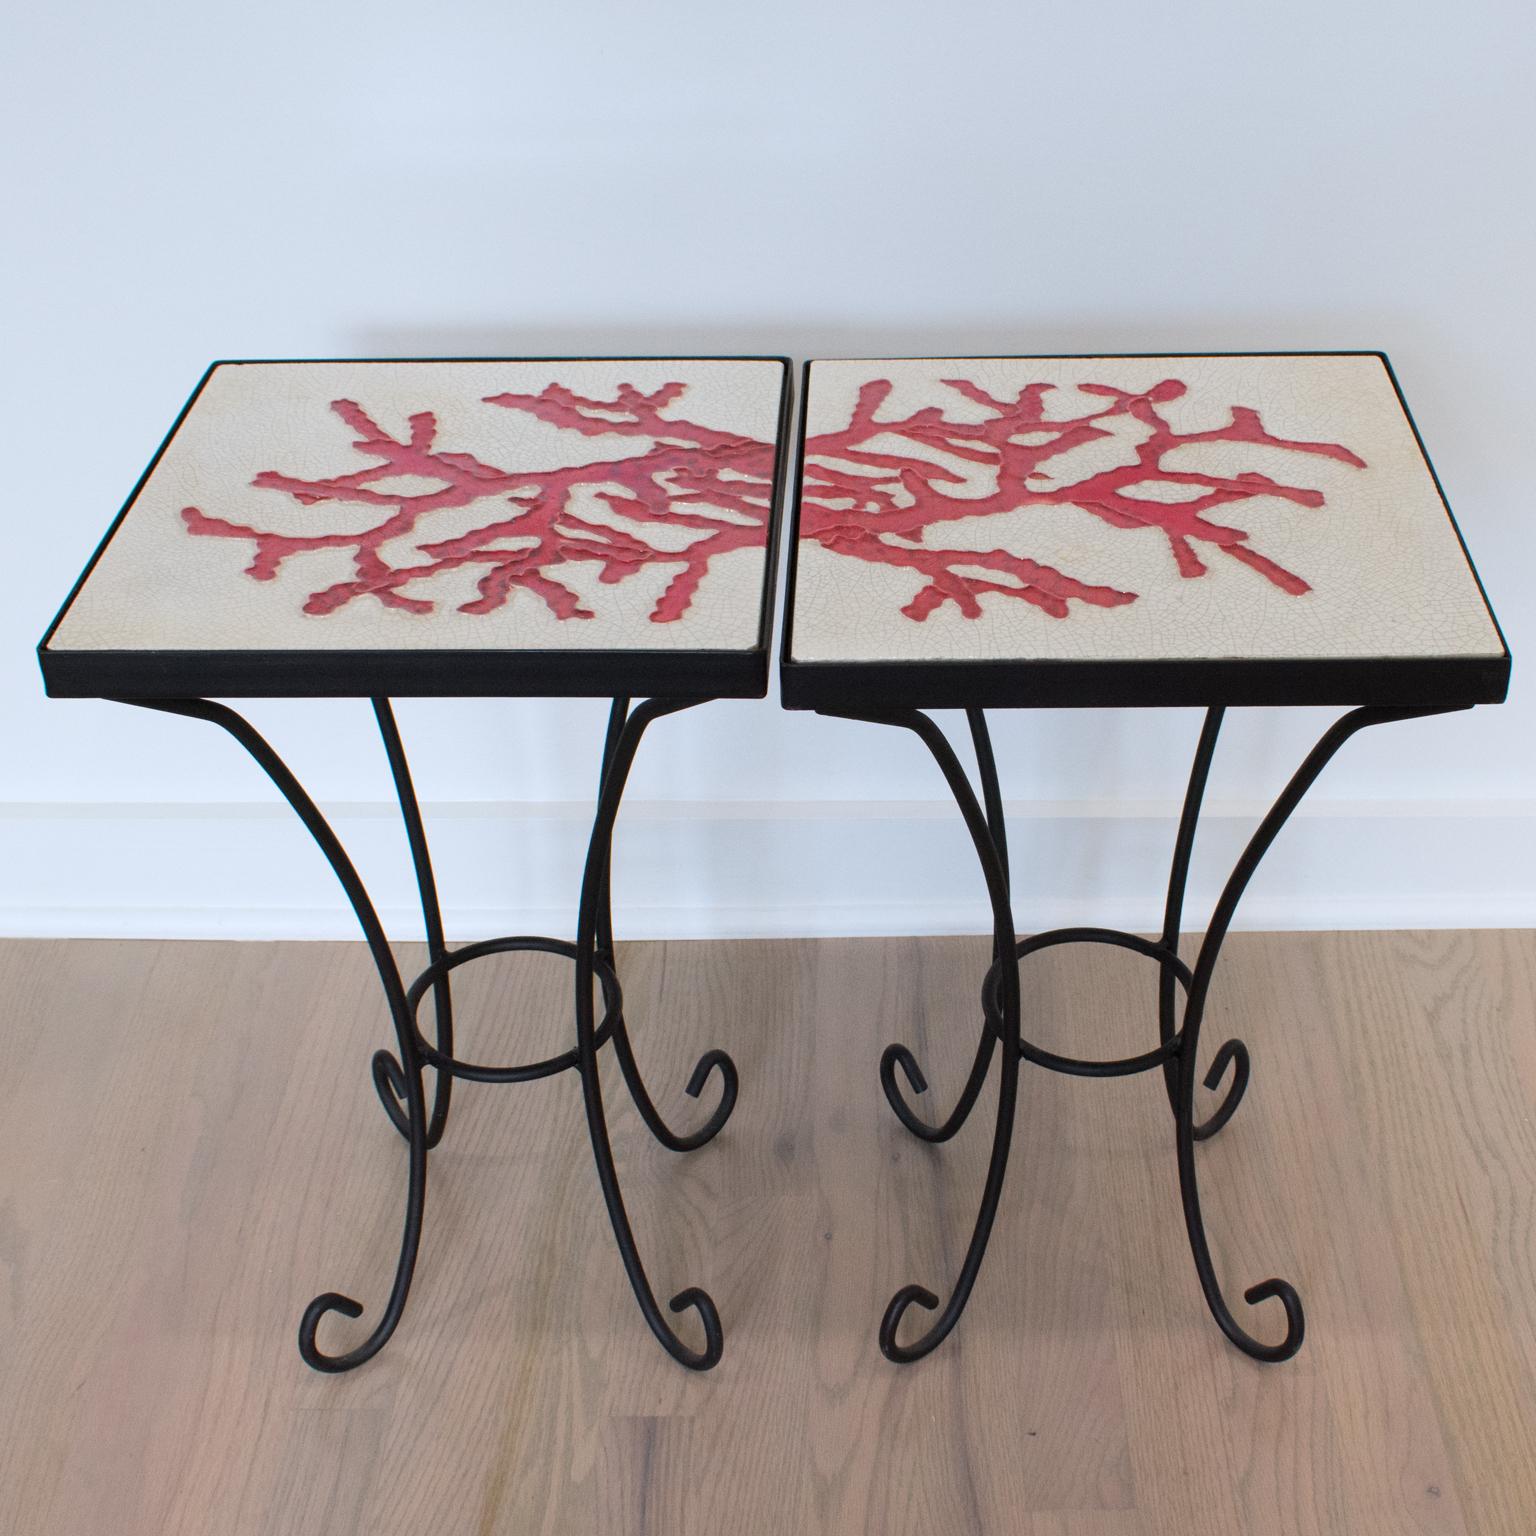 Mid-Century Modern Wrought Iron and Ceramic Tile Side Coffee Table, a pair, 1950s For Sale